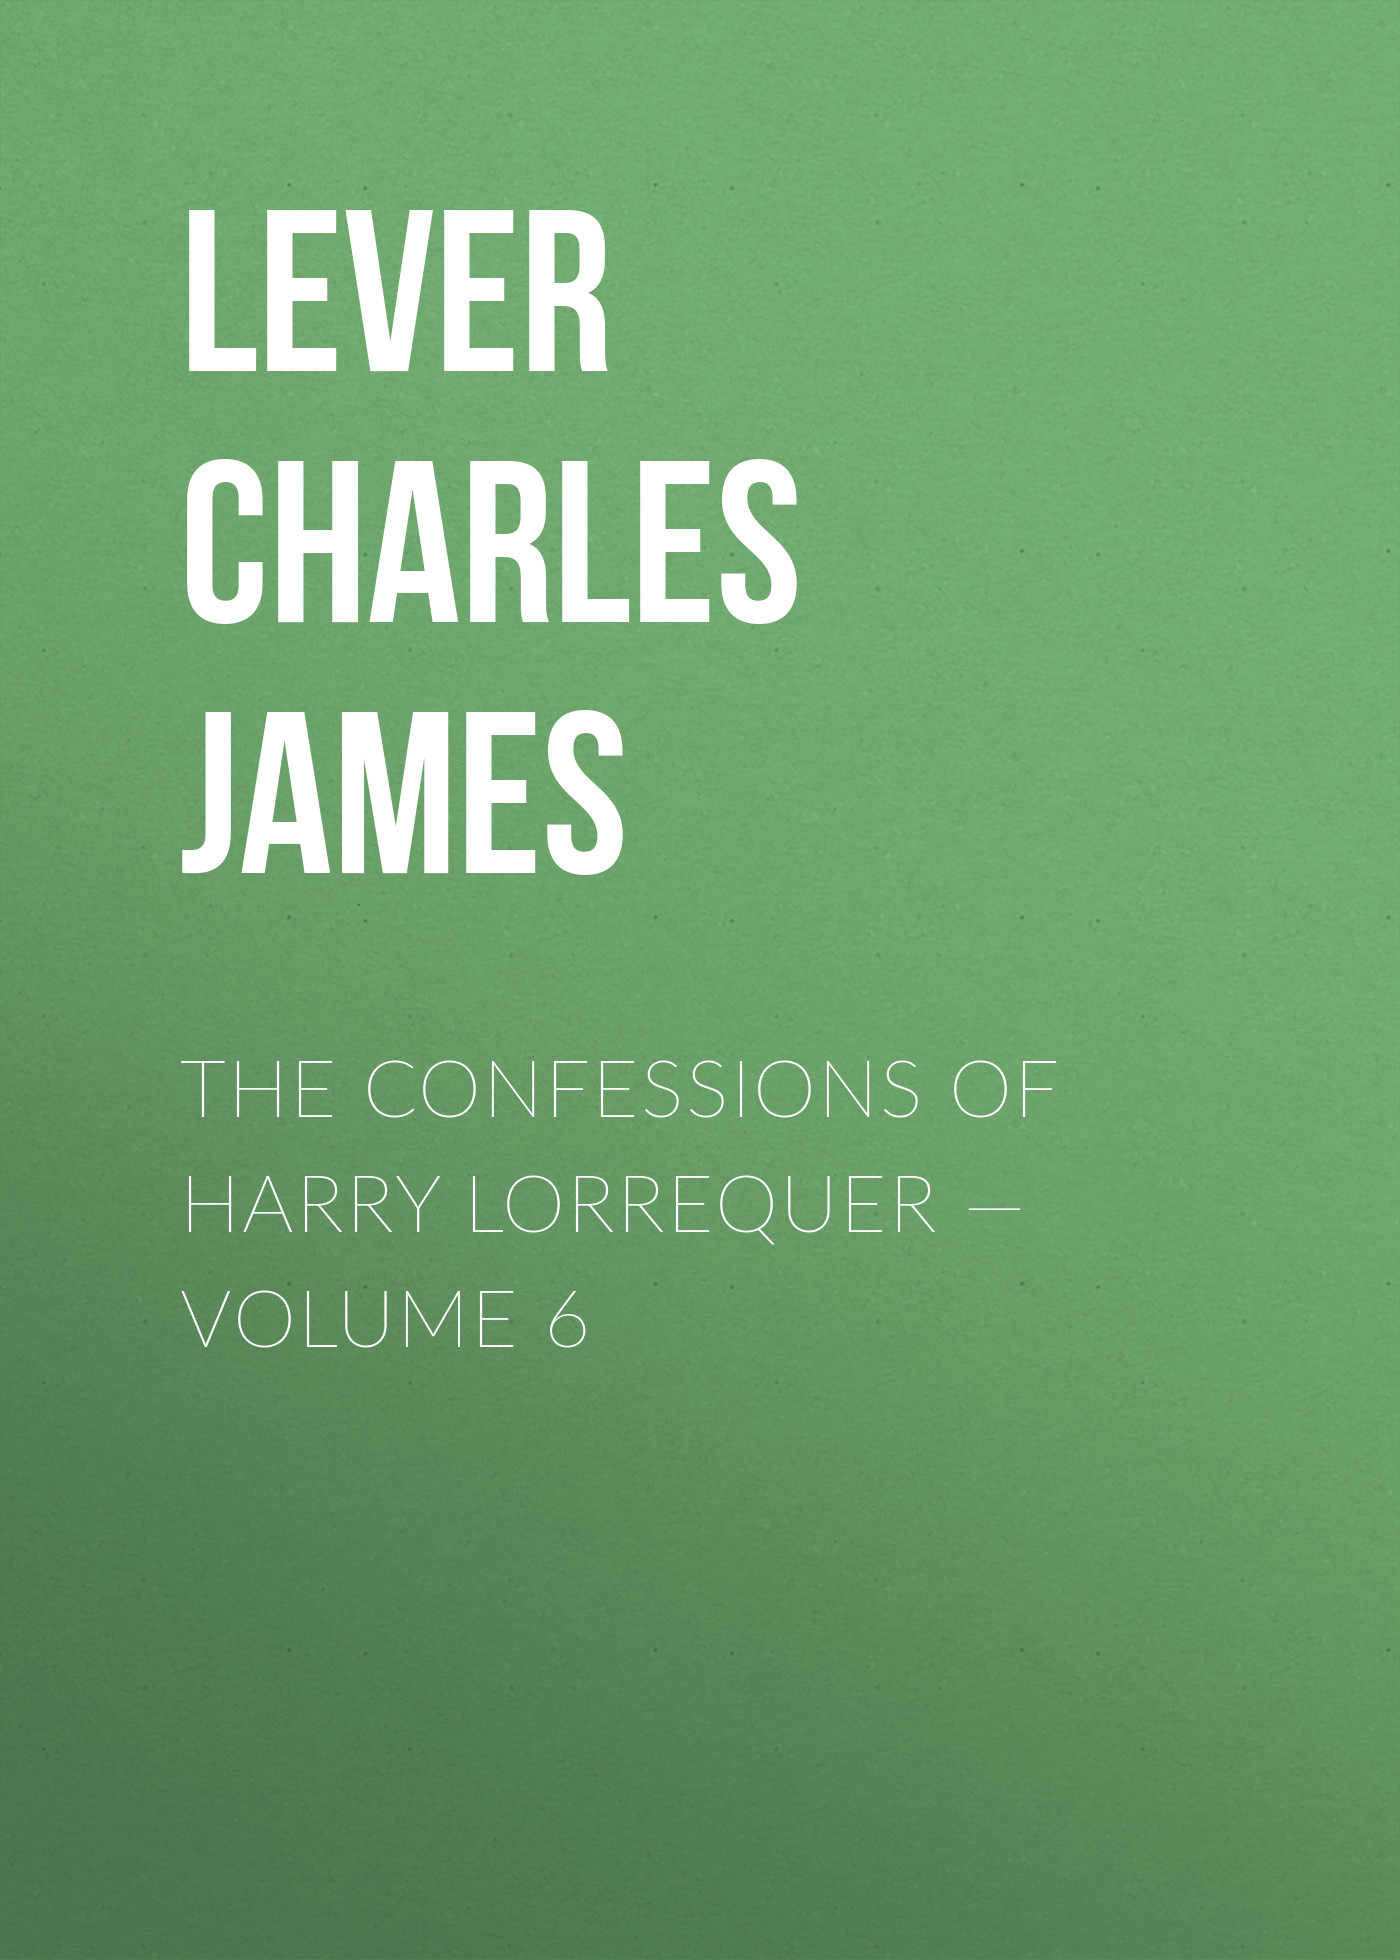 The Confessions of Harry Lorrequer— Volume 6